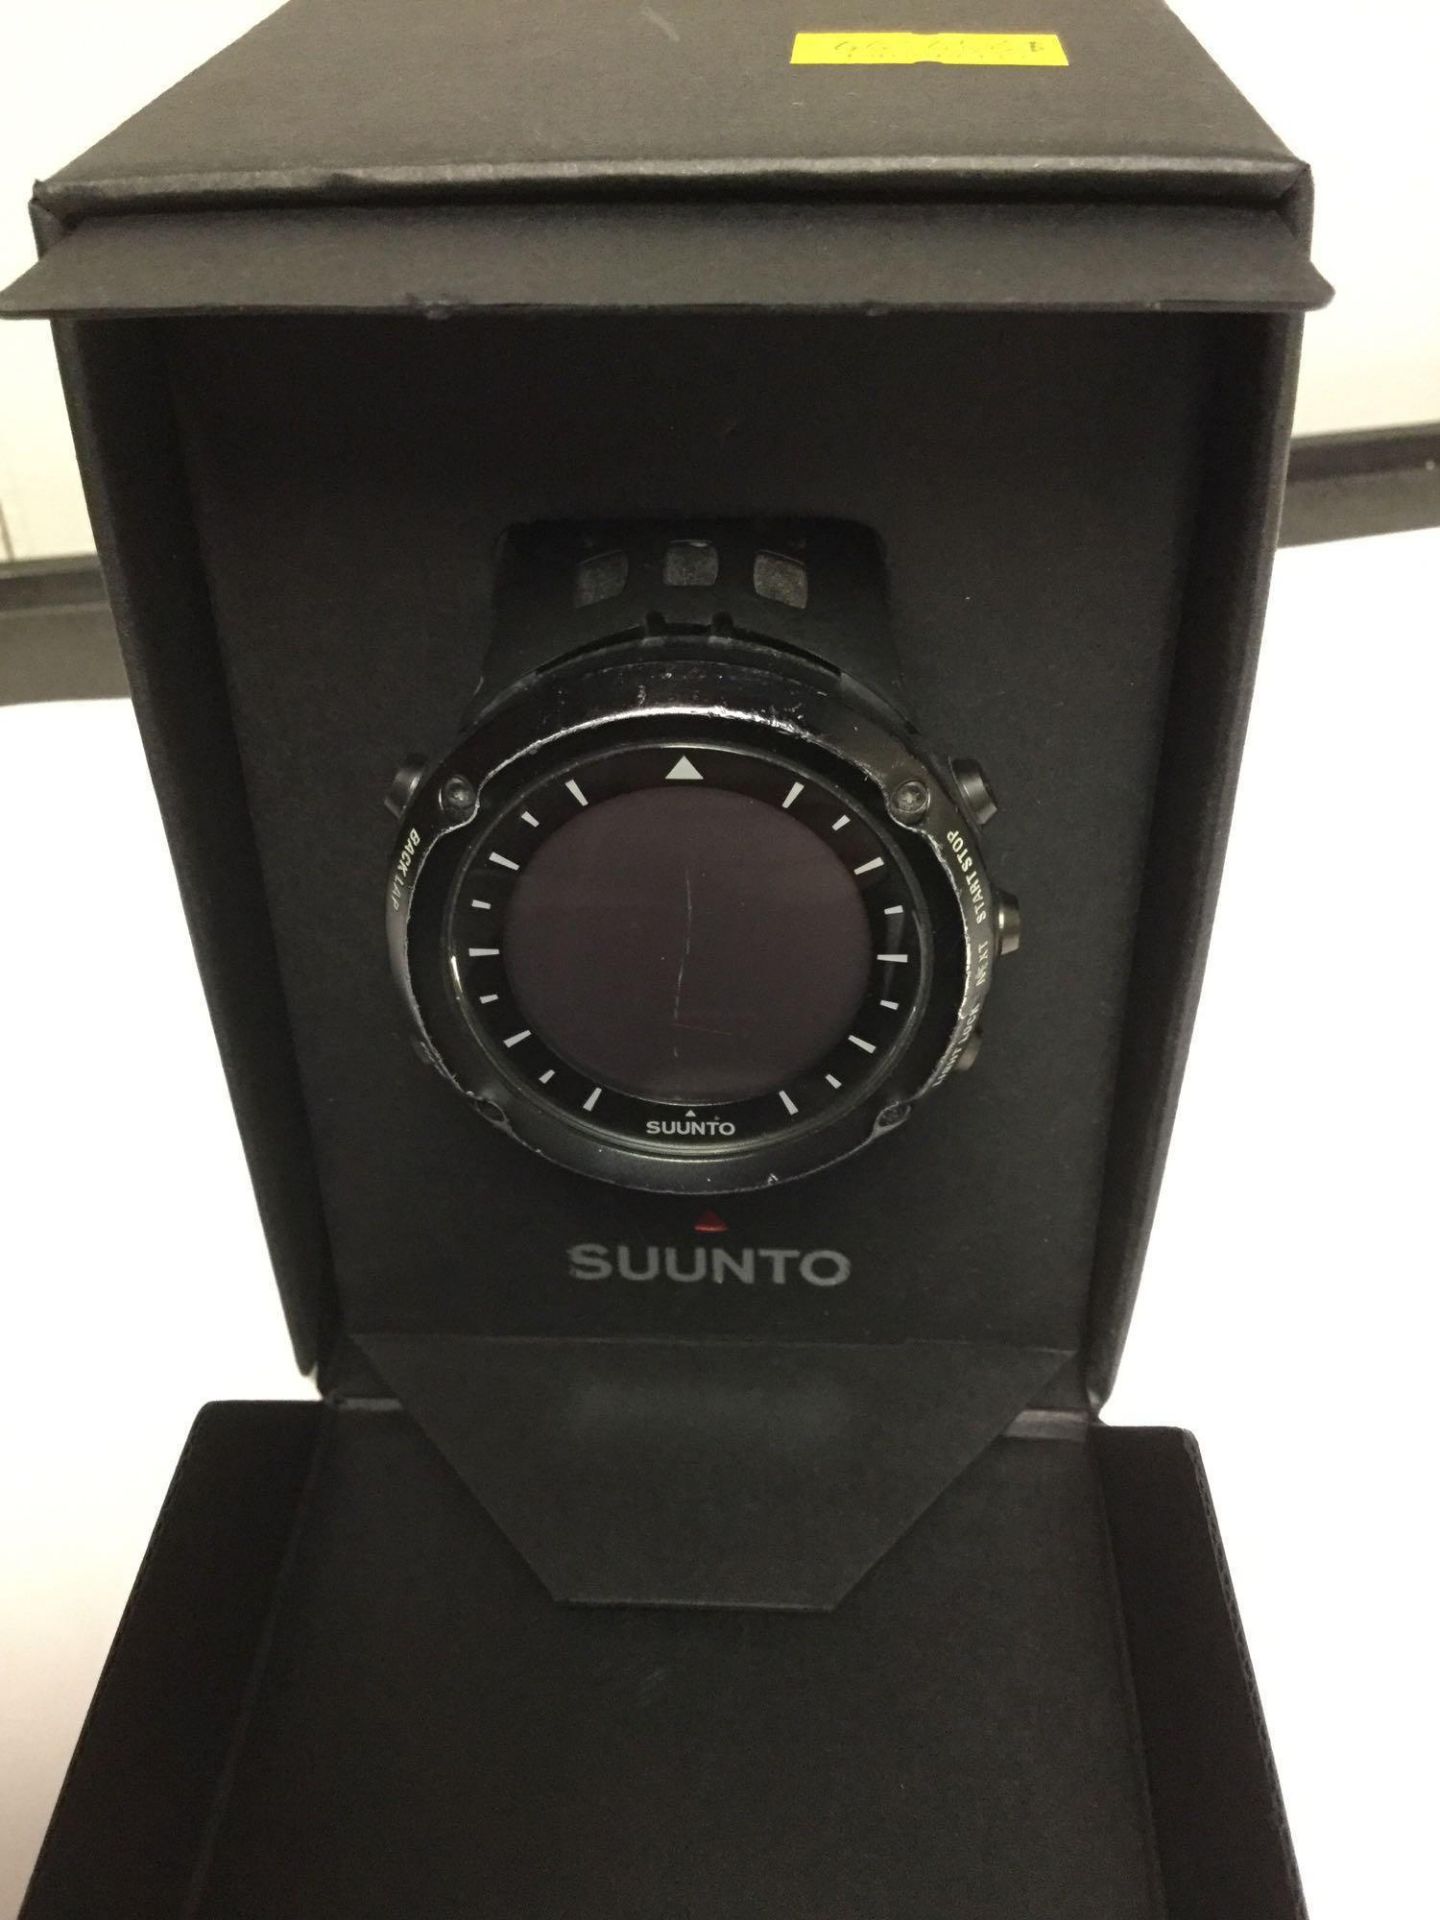 Suunto Watch with Box - Image 2 of 2